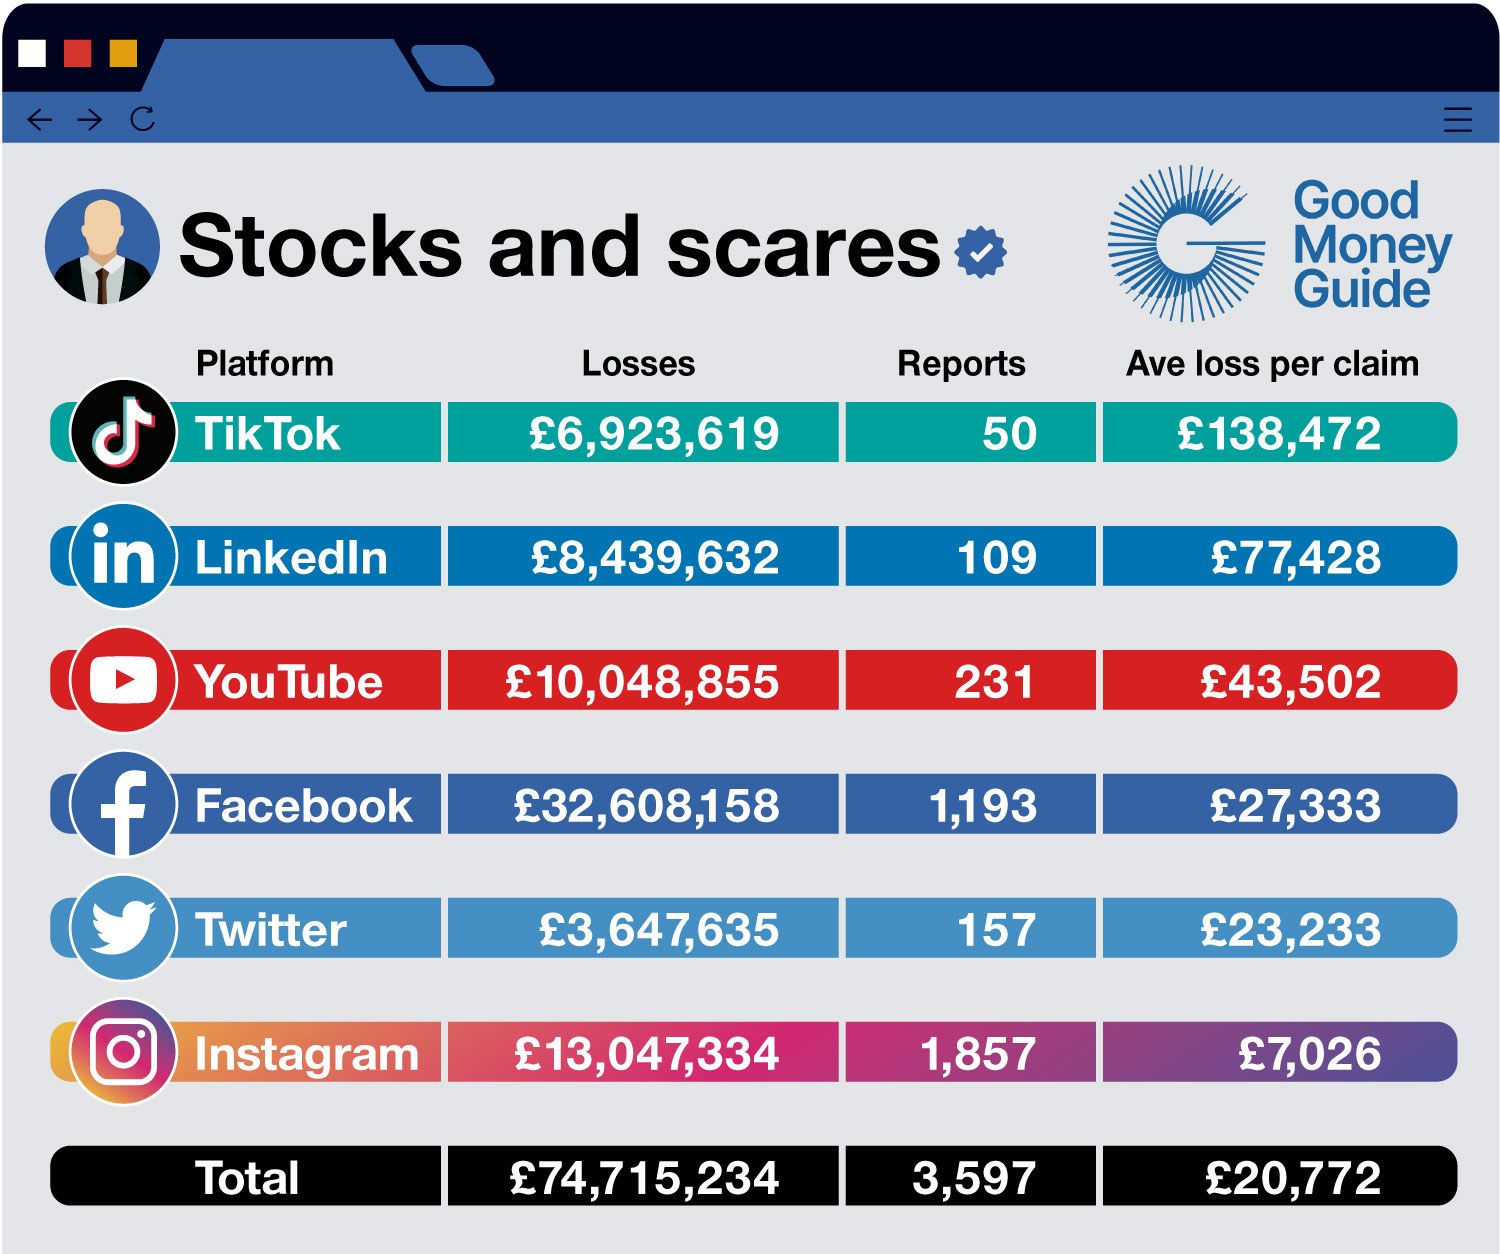 Stocks and scares